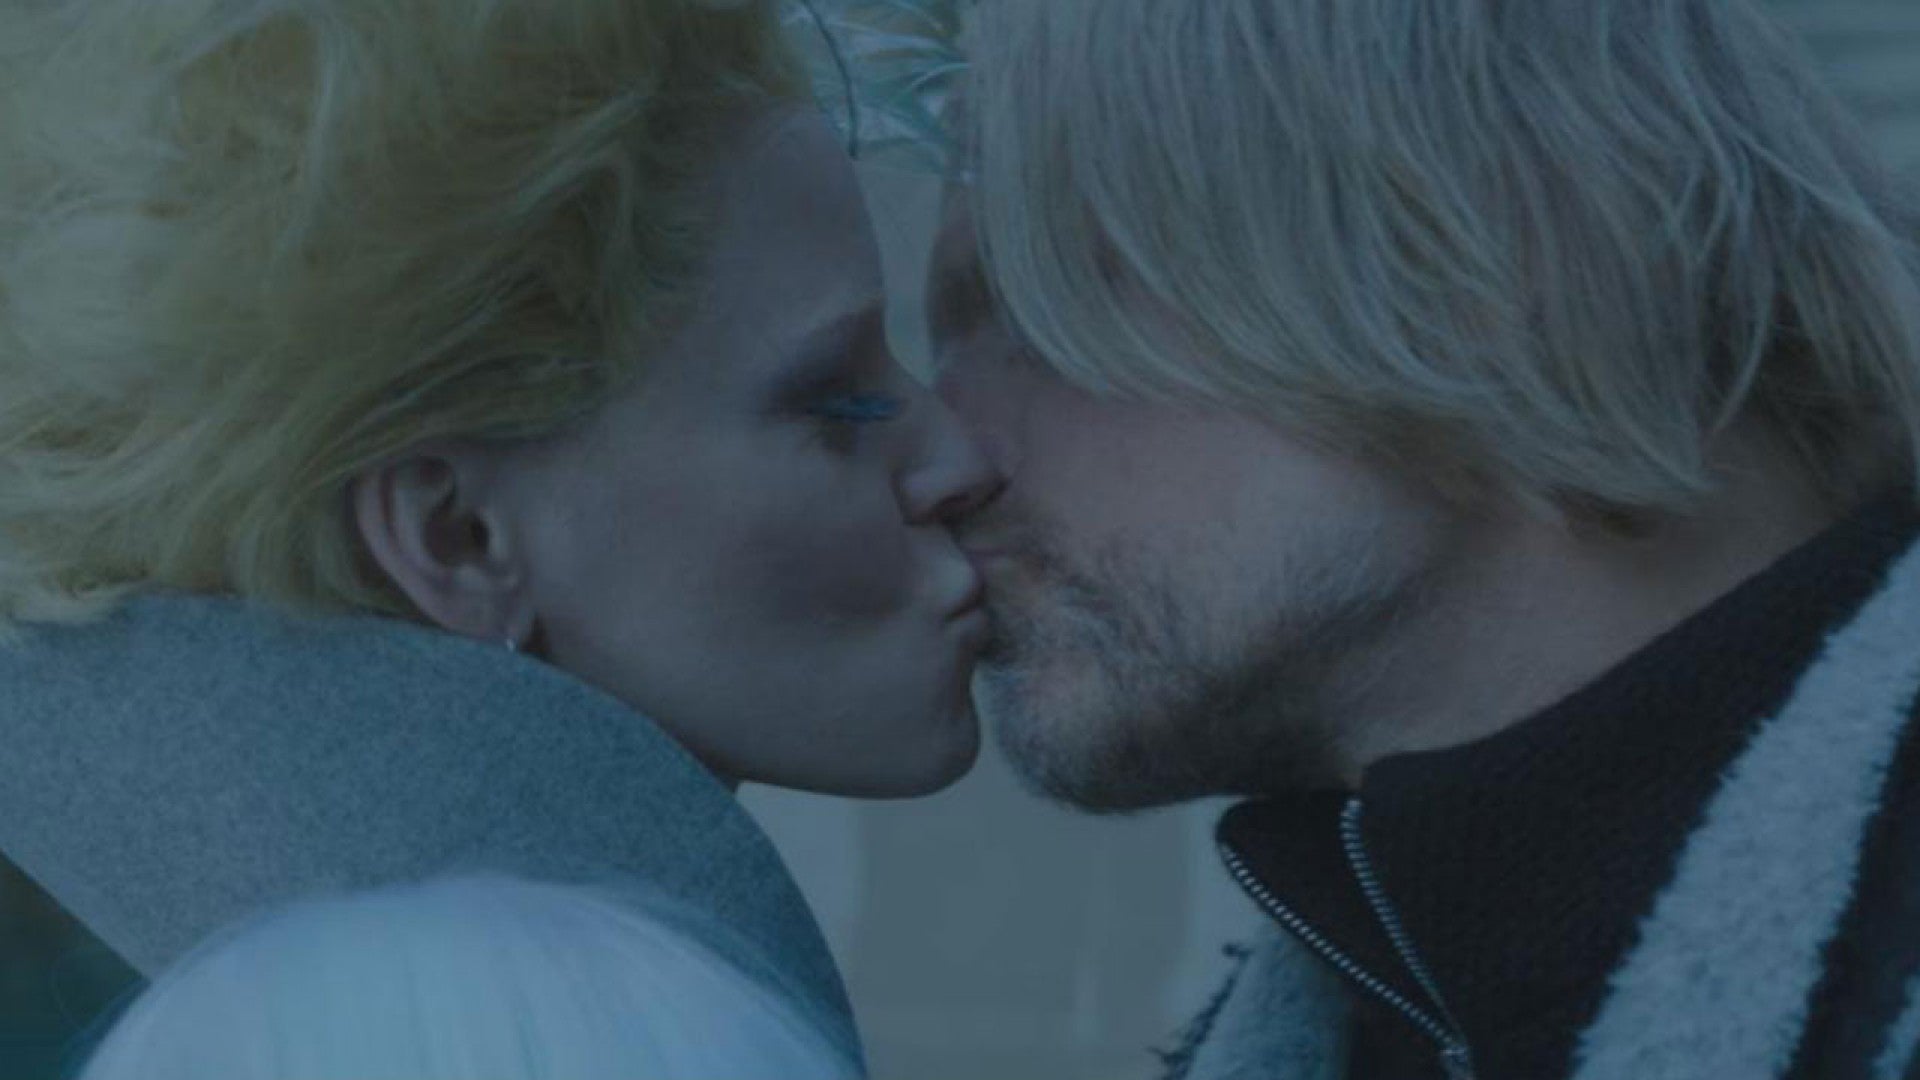 EXCLUSIVE: Woody Harrelson Admits Crush on Elizabeth Banks, Steals Kiss  While Filming 'Hunger Games'